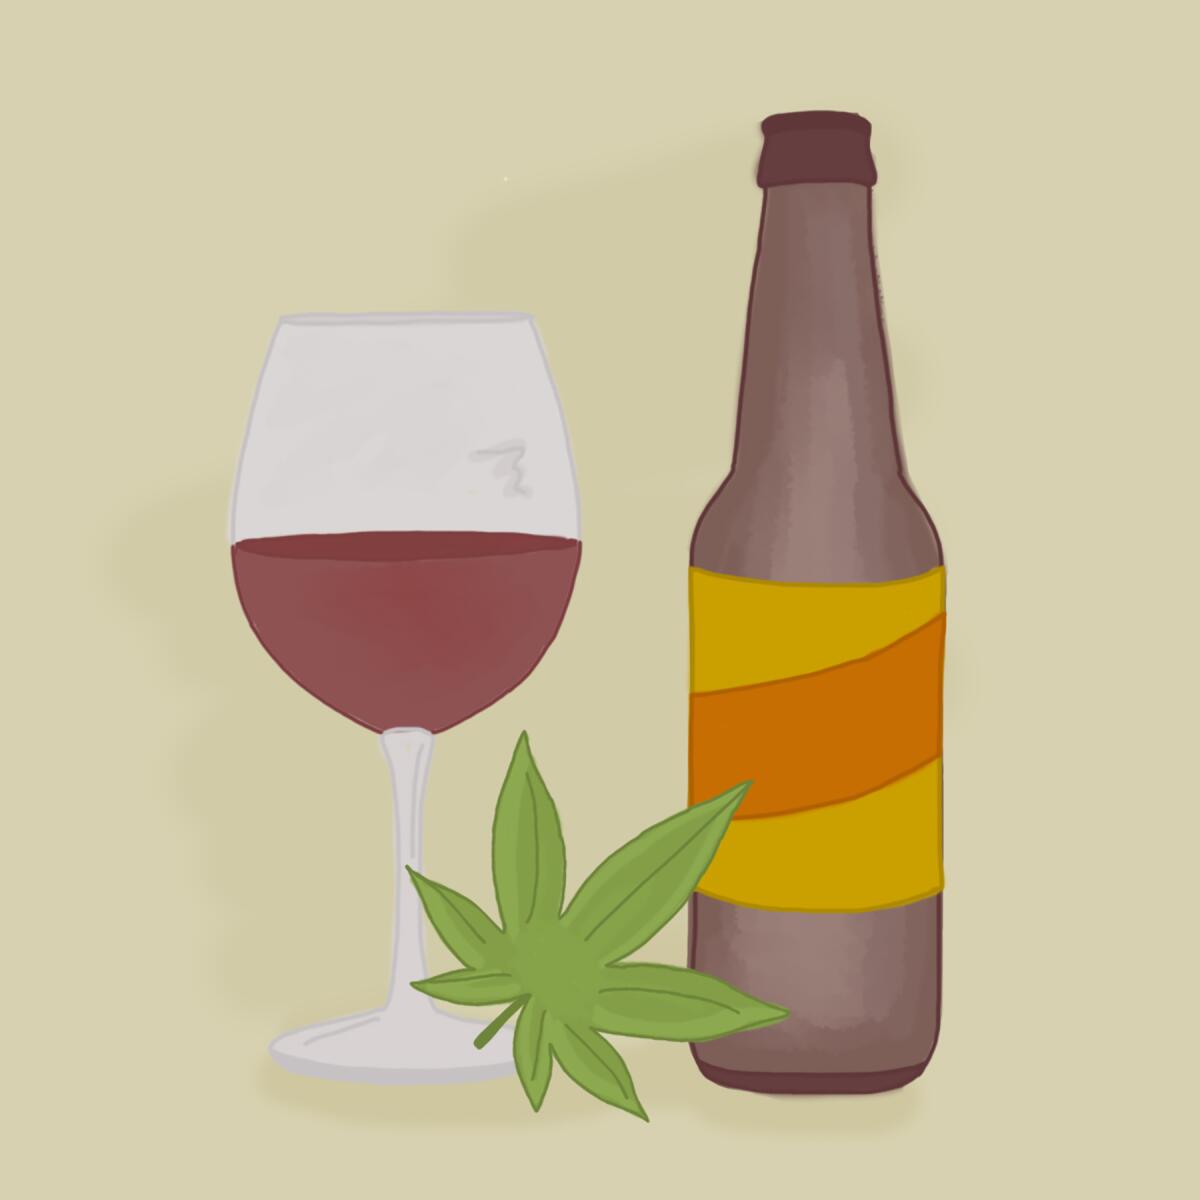 Illustration of a glass of wine, a bottle of beer and a weed leaf.